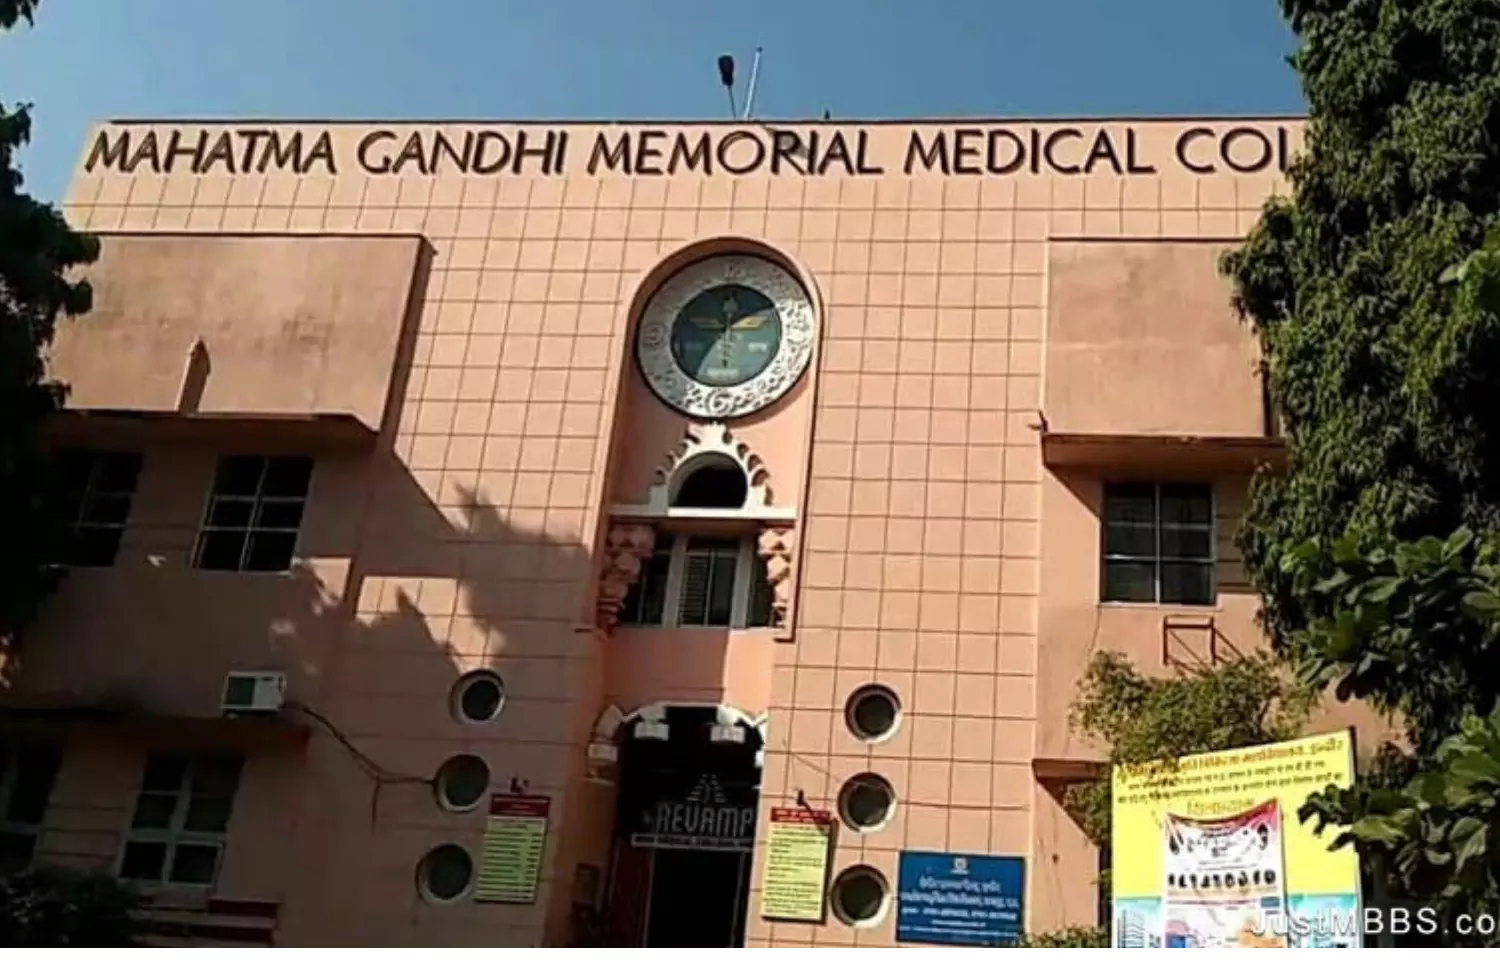 Bond Defaulters at MGM Indore: Registration of 274 doctors to get cancelled